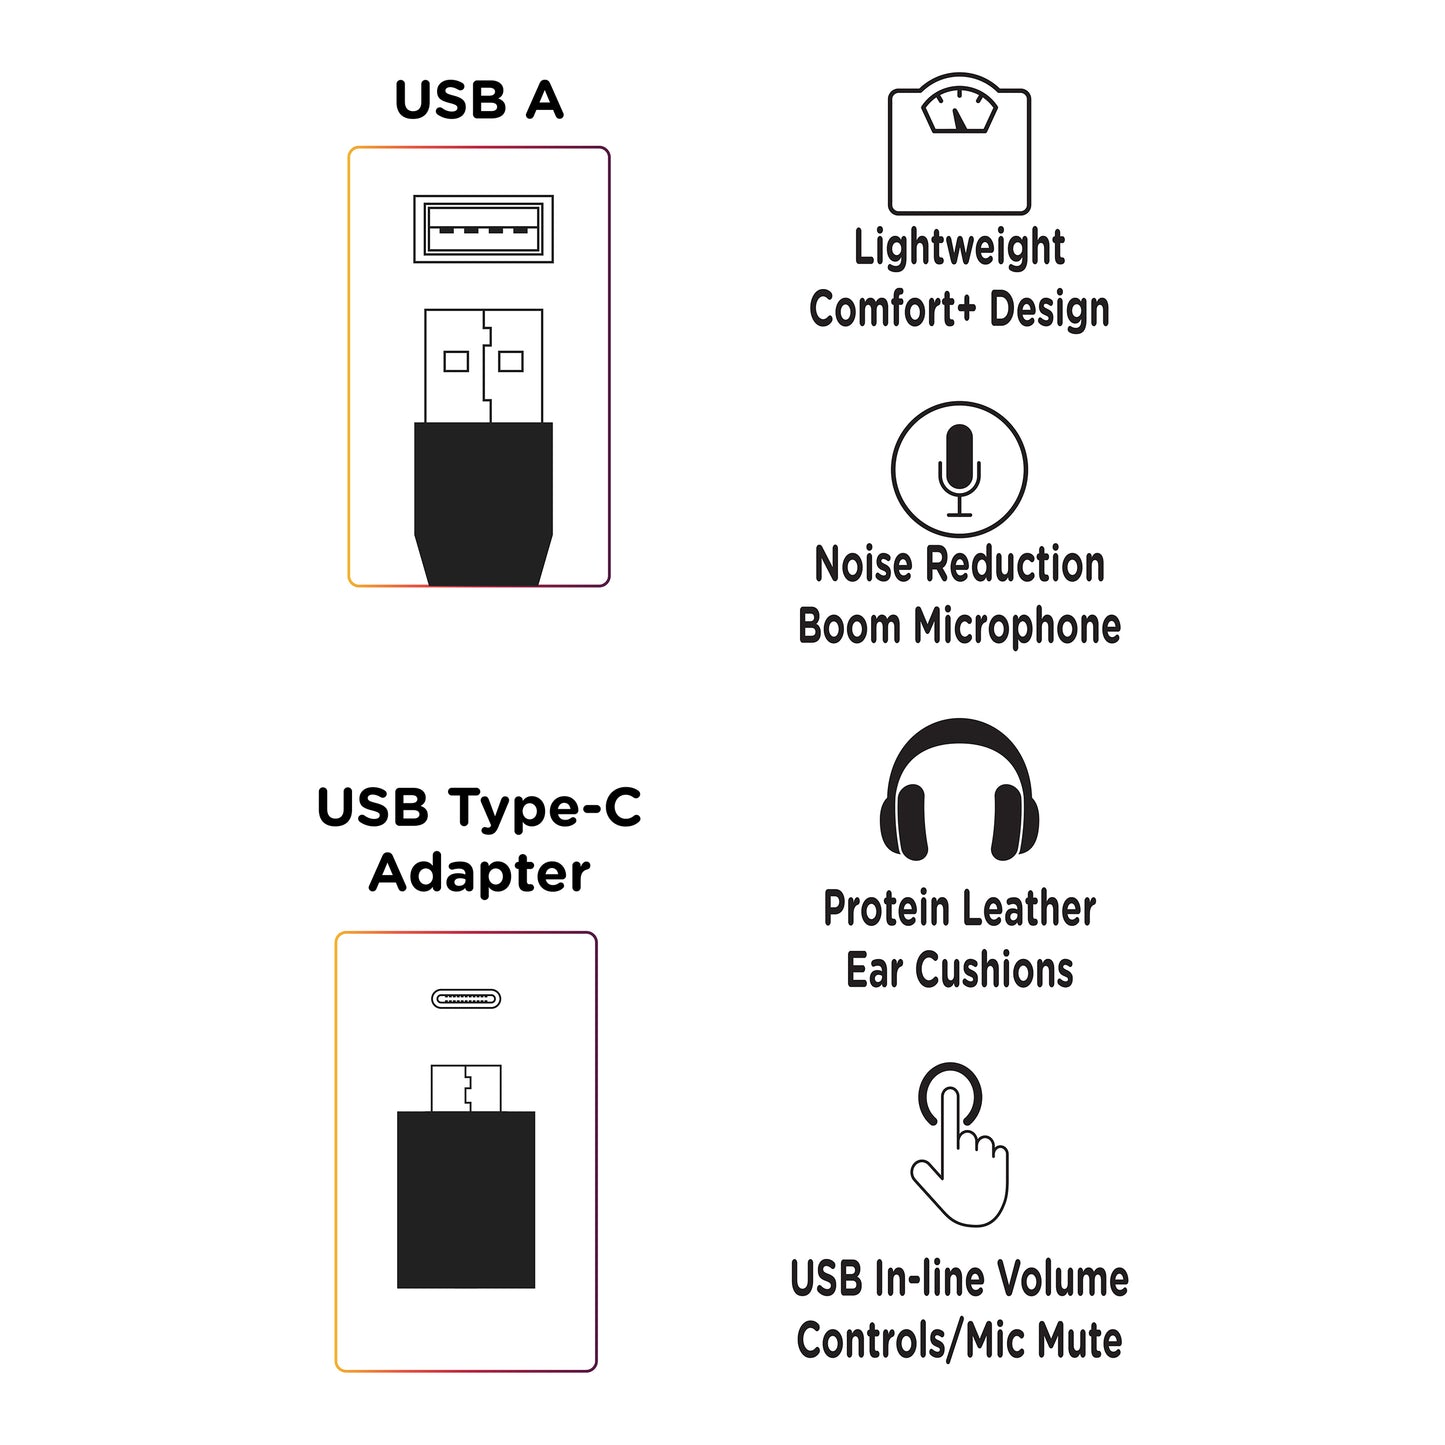 Icon image card depicting the features of the Connect USB Stereo Headset: Features include Lightweight Design, Flexible Boom Microphone, Protein Leather Ear Cushions, Inline Volume Control and USB A connector to connect to a PC/Mac, Tablet or computer